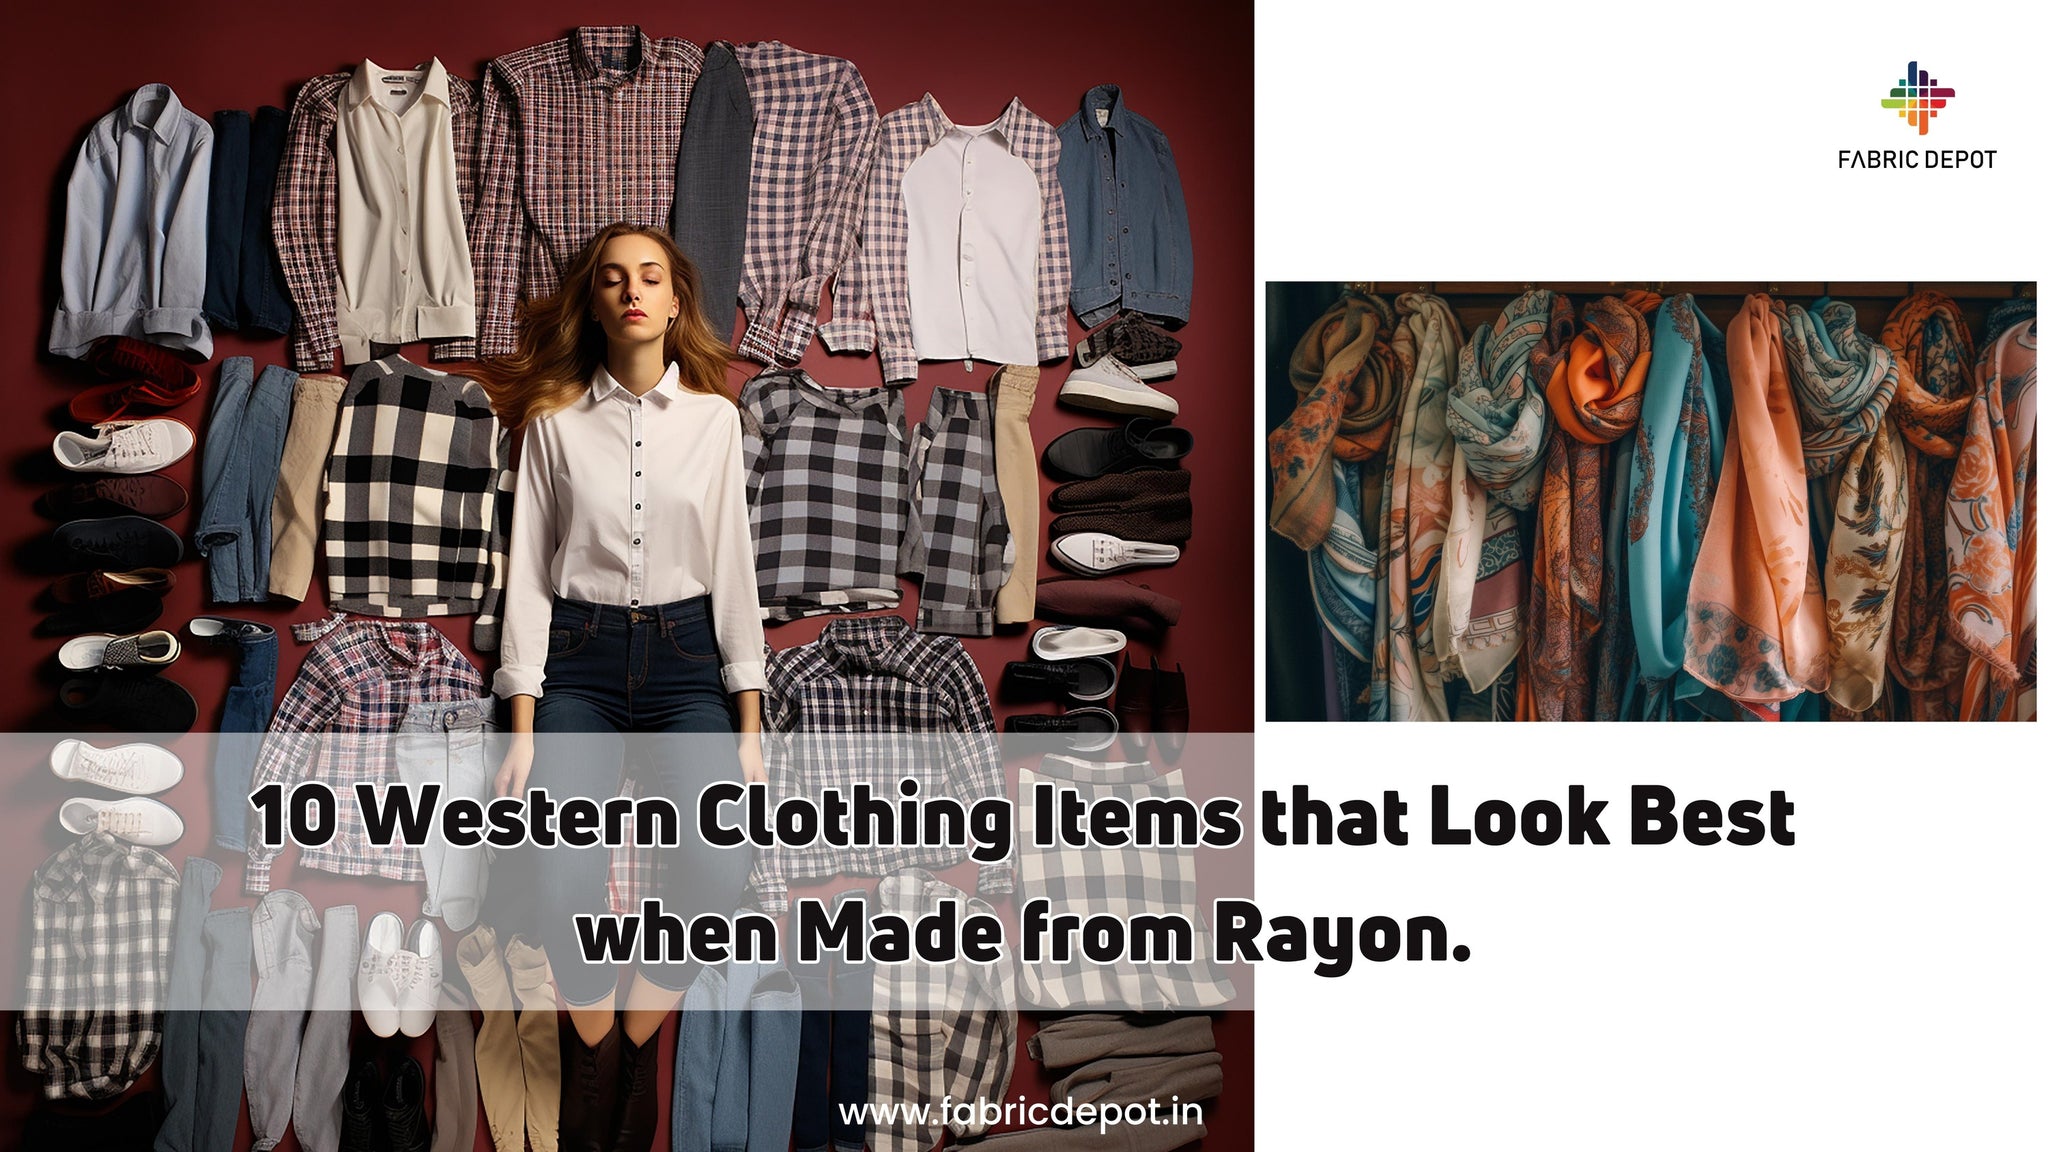 10 Western Clothing Items that Look Best when Made from Rayon